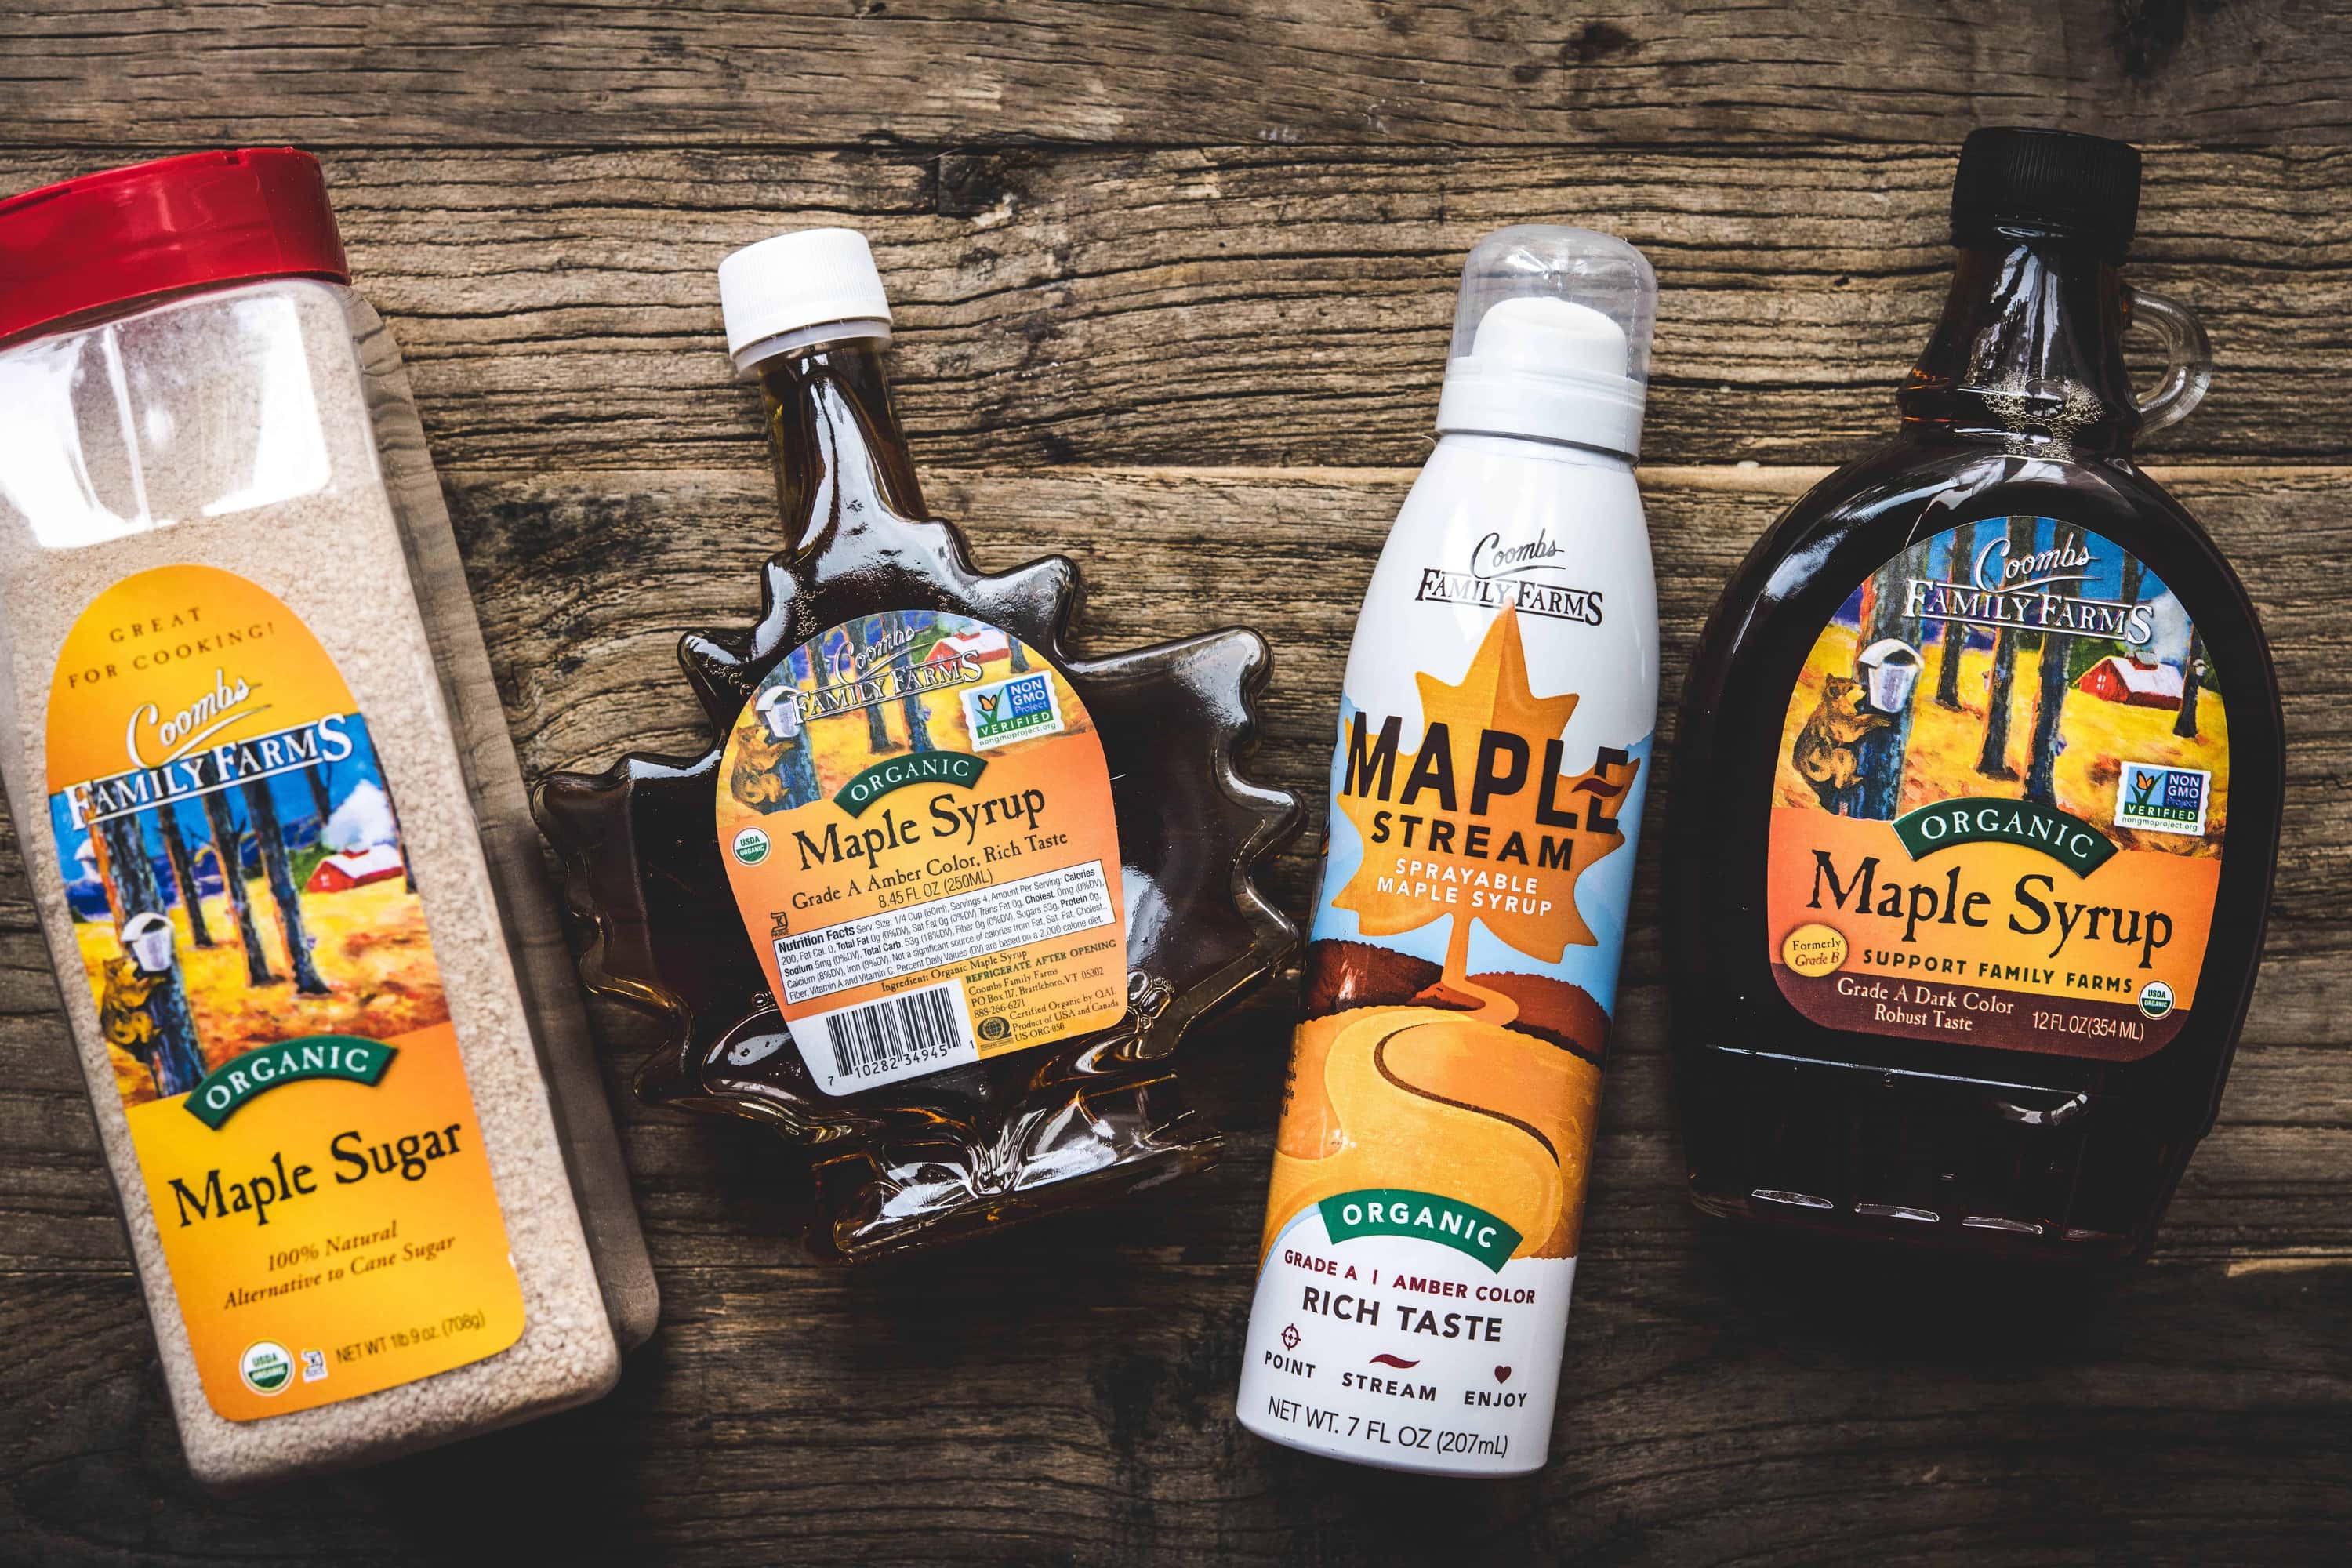 Overhead view of Coombs Family Farms maple syrup products on wood table